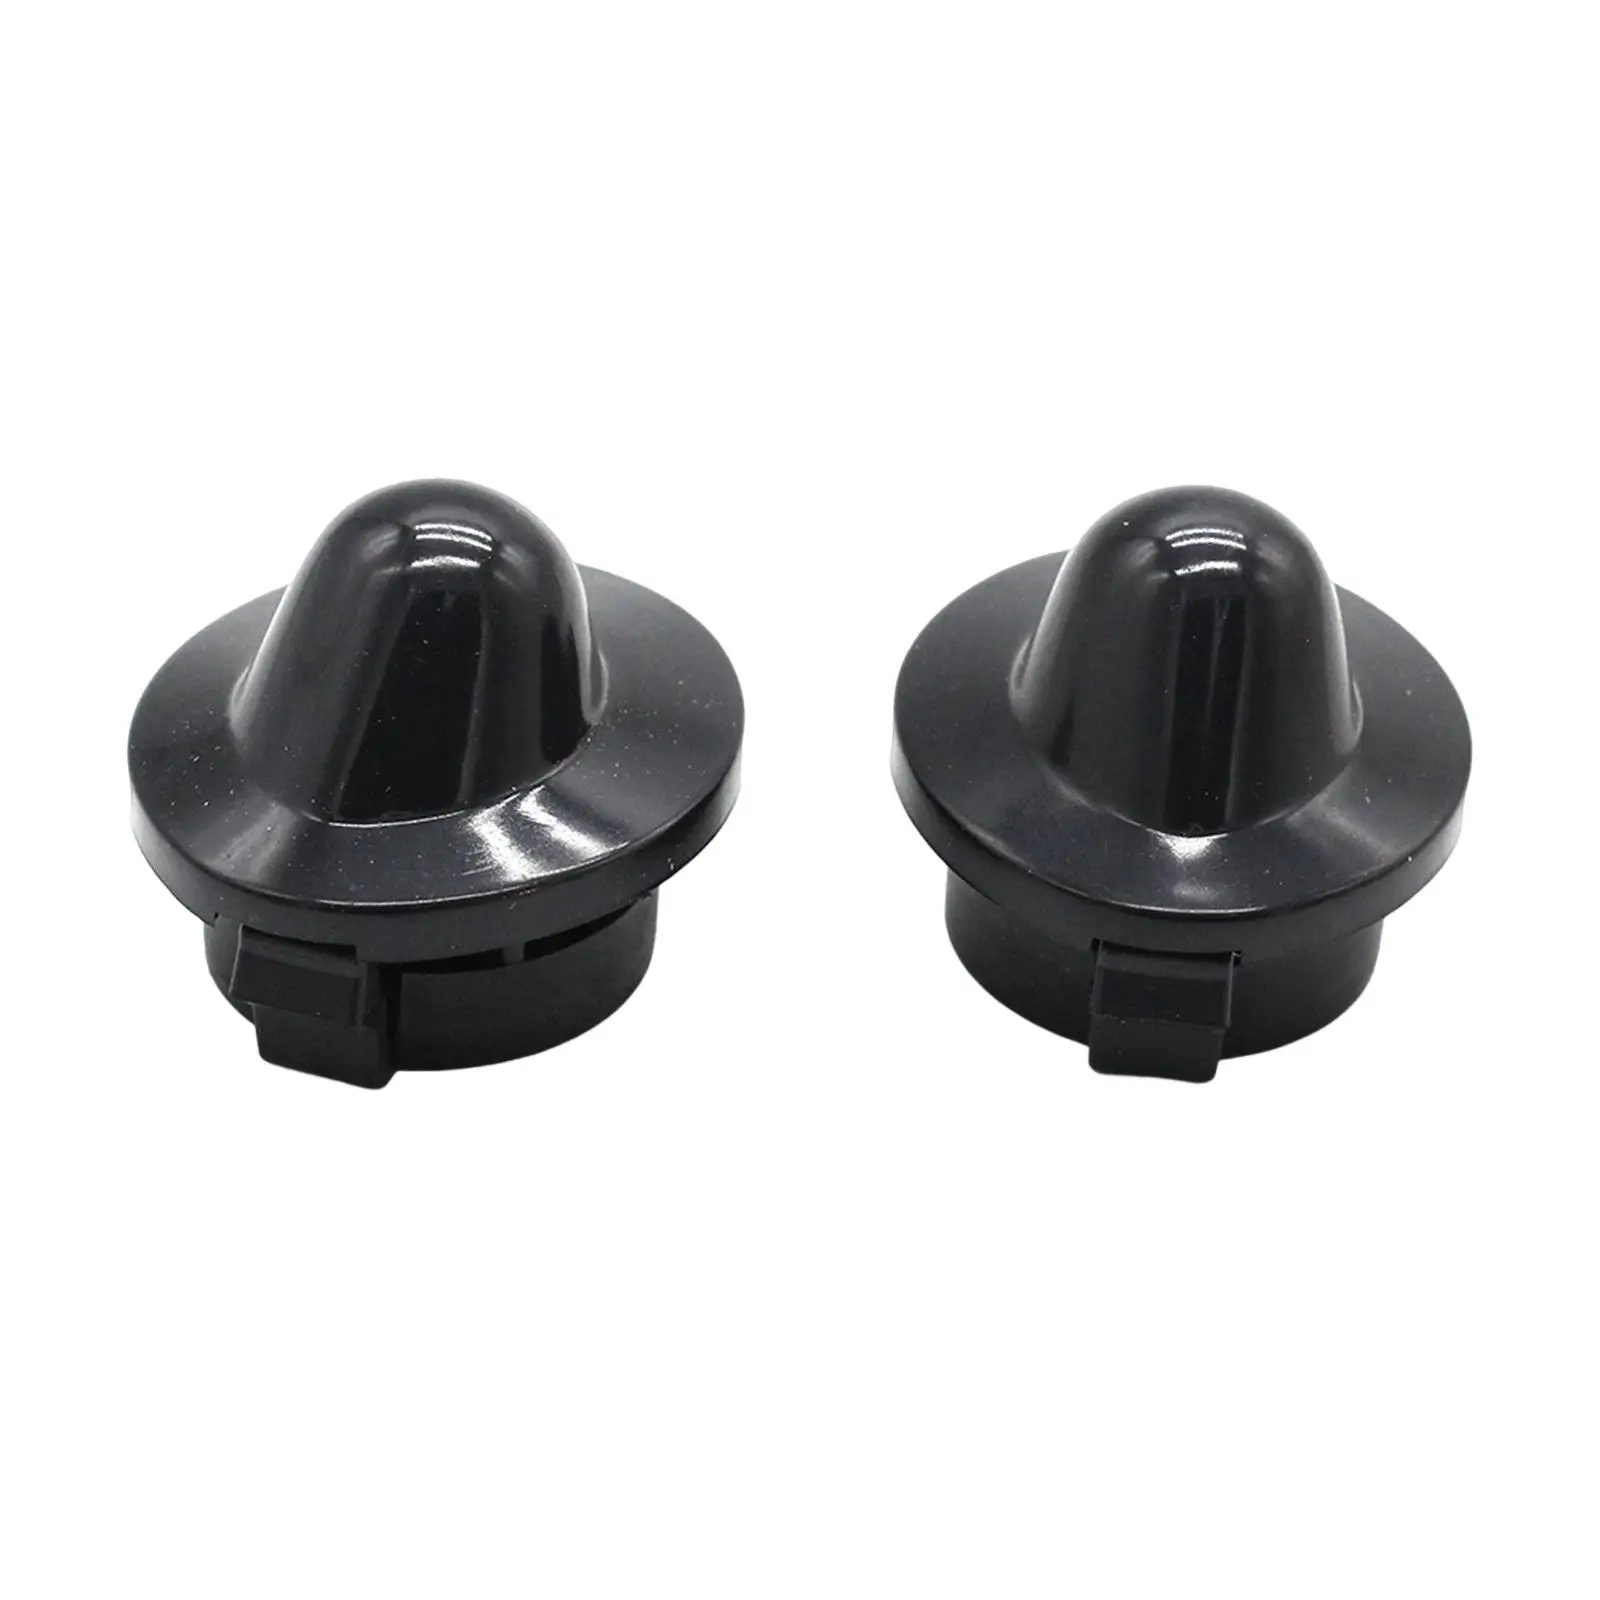 License Light Lenses Caps F37Z-13550-Aa for Ford Trucks 1990-2014 Sturdy Replaces